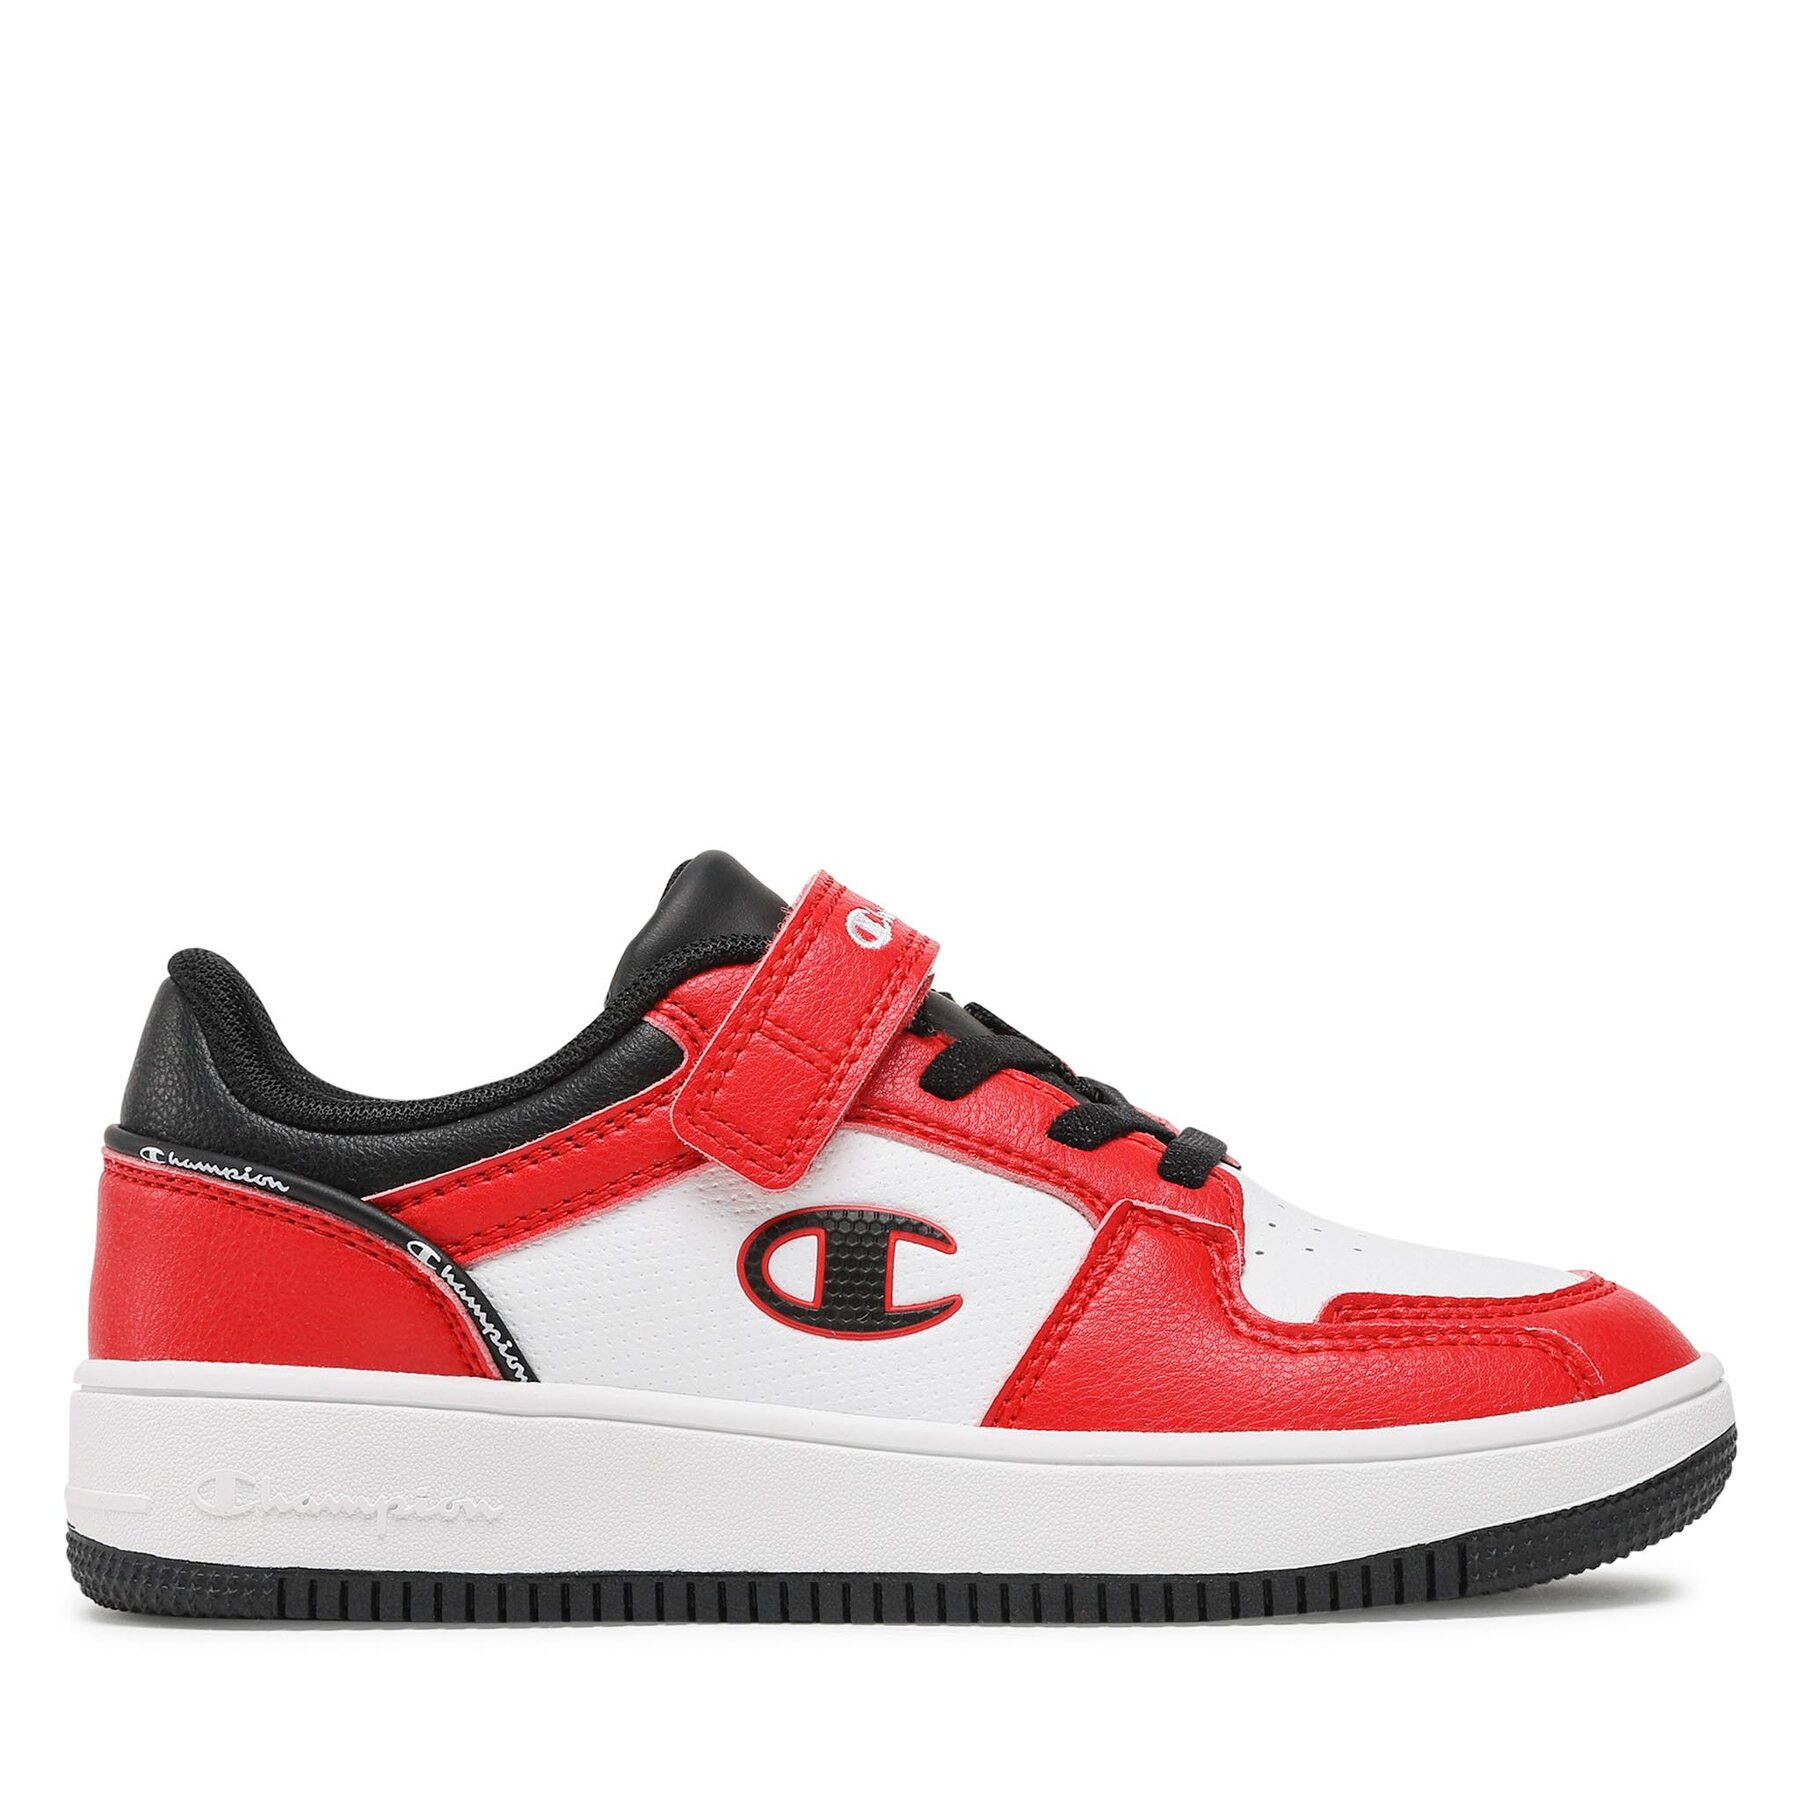 Sneakers Champion Rebound 2.0 Low B Ps S32414-CHA-RS001 Red/Wht/Nbk von Champion